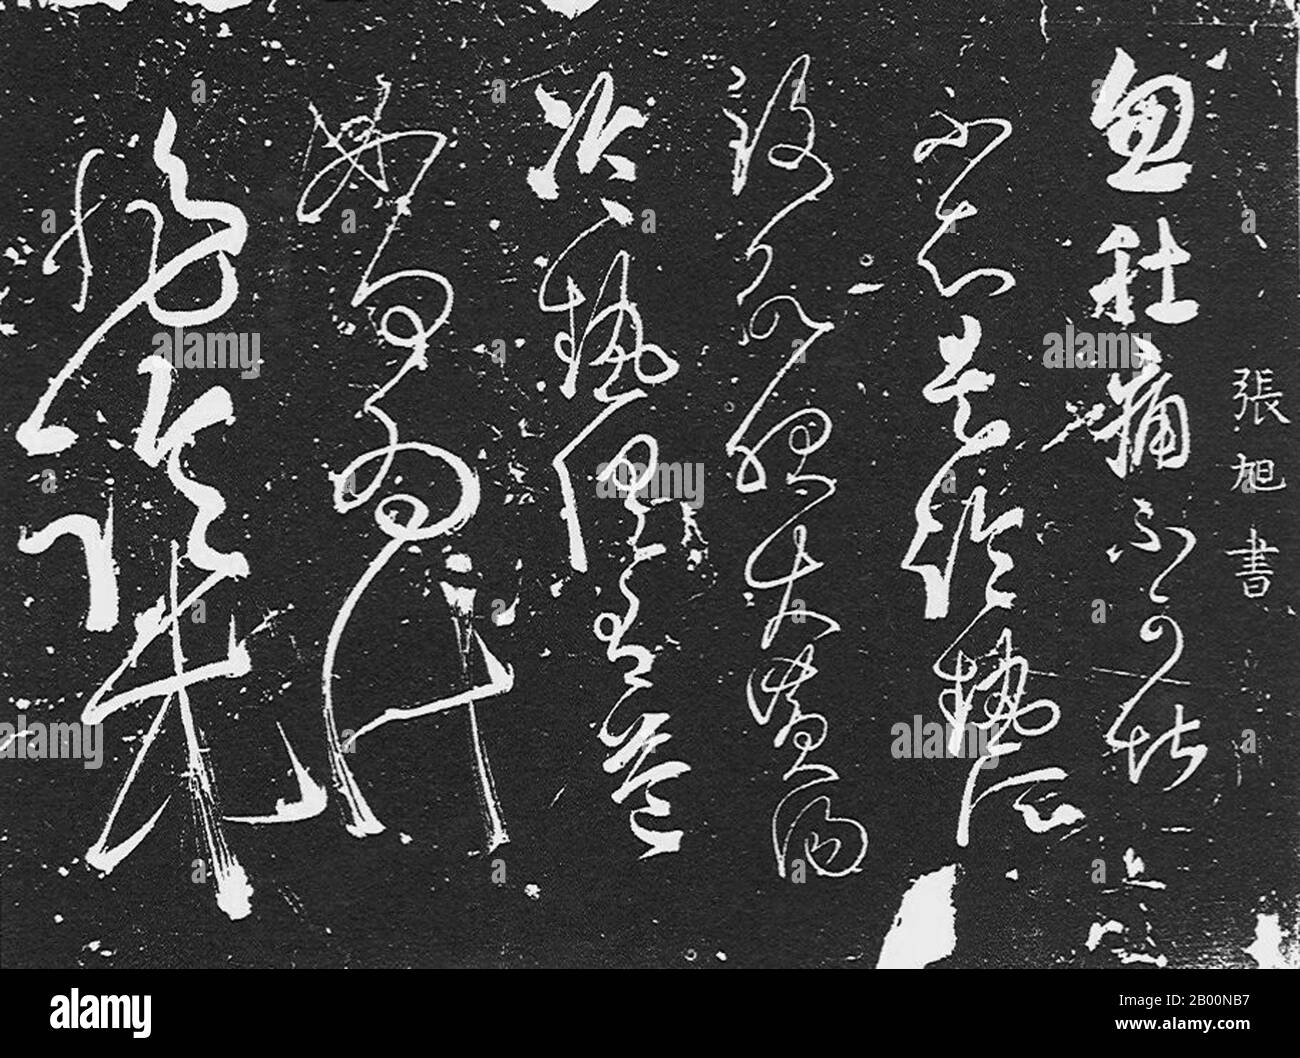 China: Chinese script (cursive). Tang Dynasty calligraphy attributed to Zhang Shui (9th century).  As the originator of Wild Cursive Style, and a nonconformist in spirit, Zhang Shui acted altogether against calligraphic convention, earning the nickname 'Crazy Zhang'. While intoxicated, he was inspired and would proceed to create his wonderful cursive calligraphy in front of the dignitaries. Tang Emperor Wenzong (r.809-840) regarded Zhang Shui's cursive script together with Lee Bai's poem and Pei Ming's sword playing as the 'three exquisite talents of the Tang Dynasty'. Stock Photo